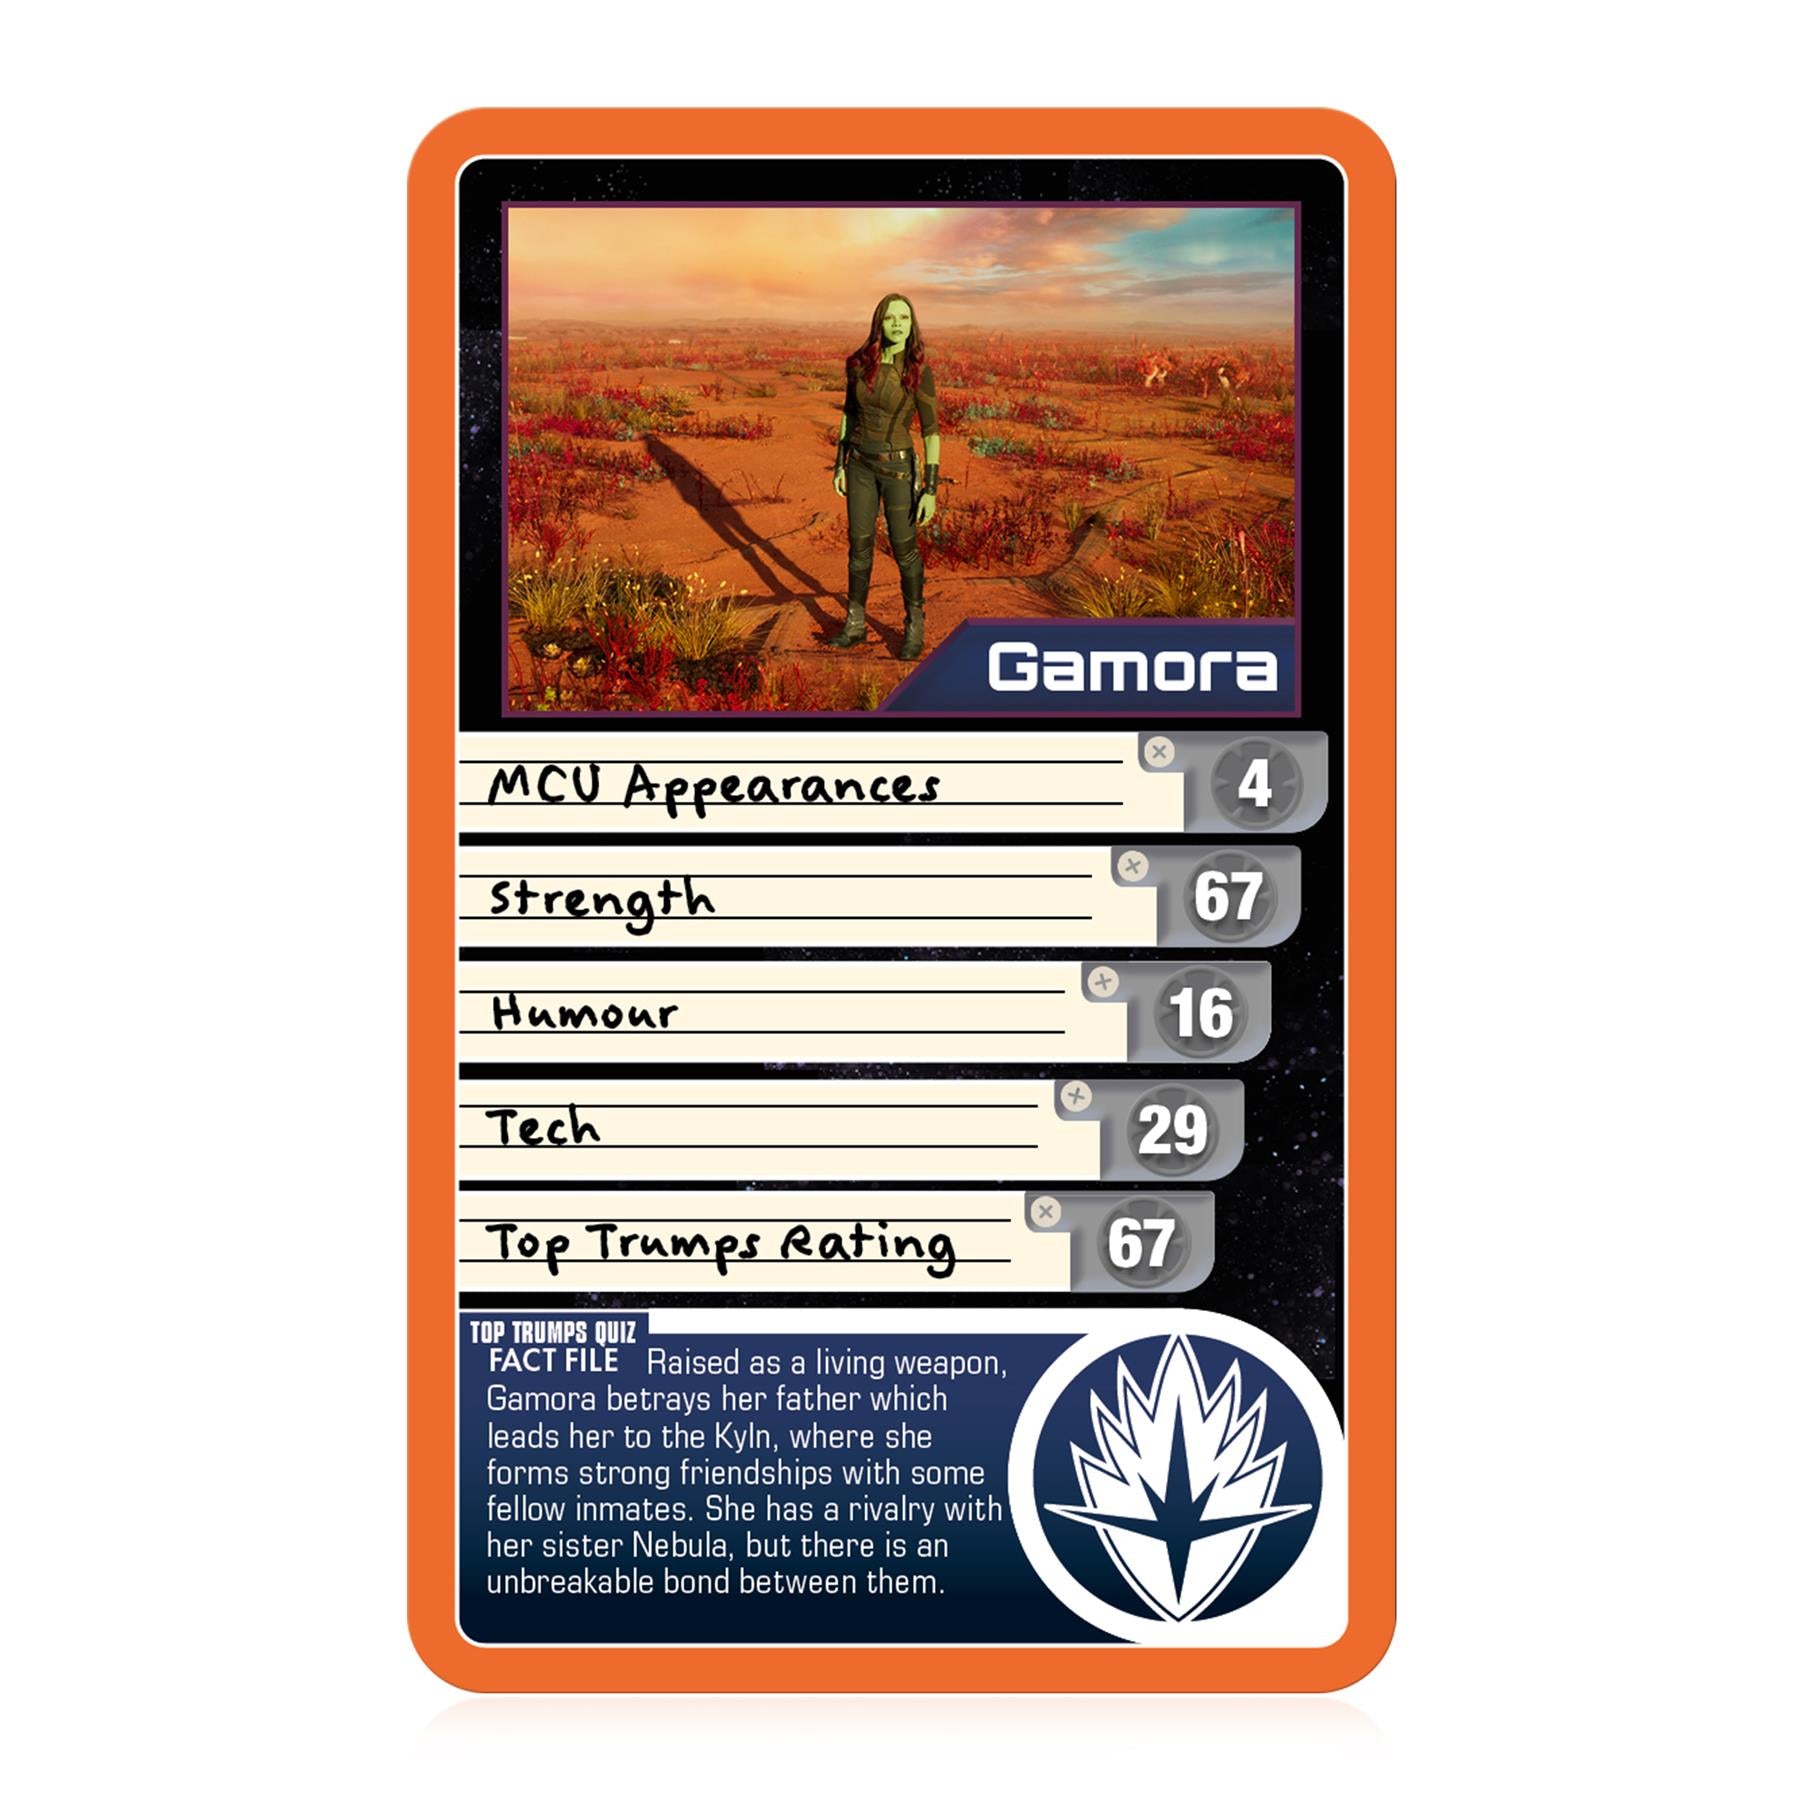 Guardians of the Galaxy Top Trumps Card Game